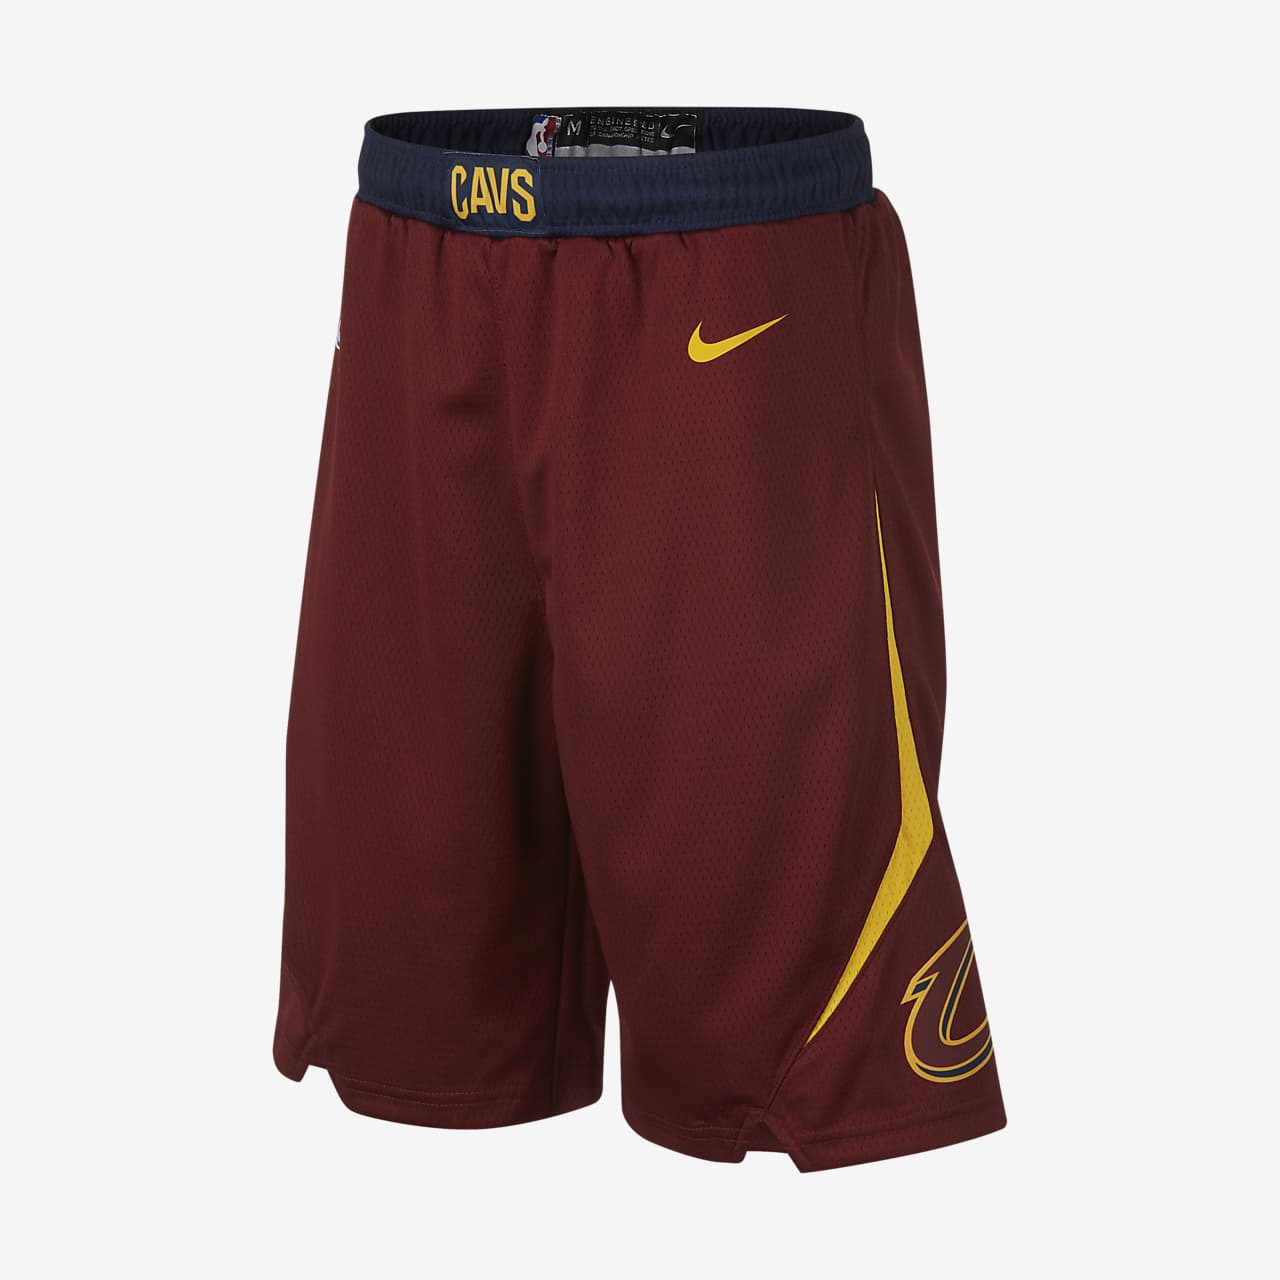 cleveland cavaliers training jersey